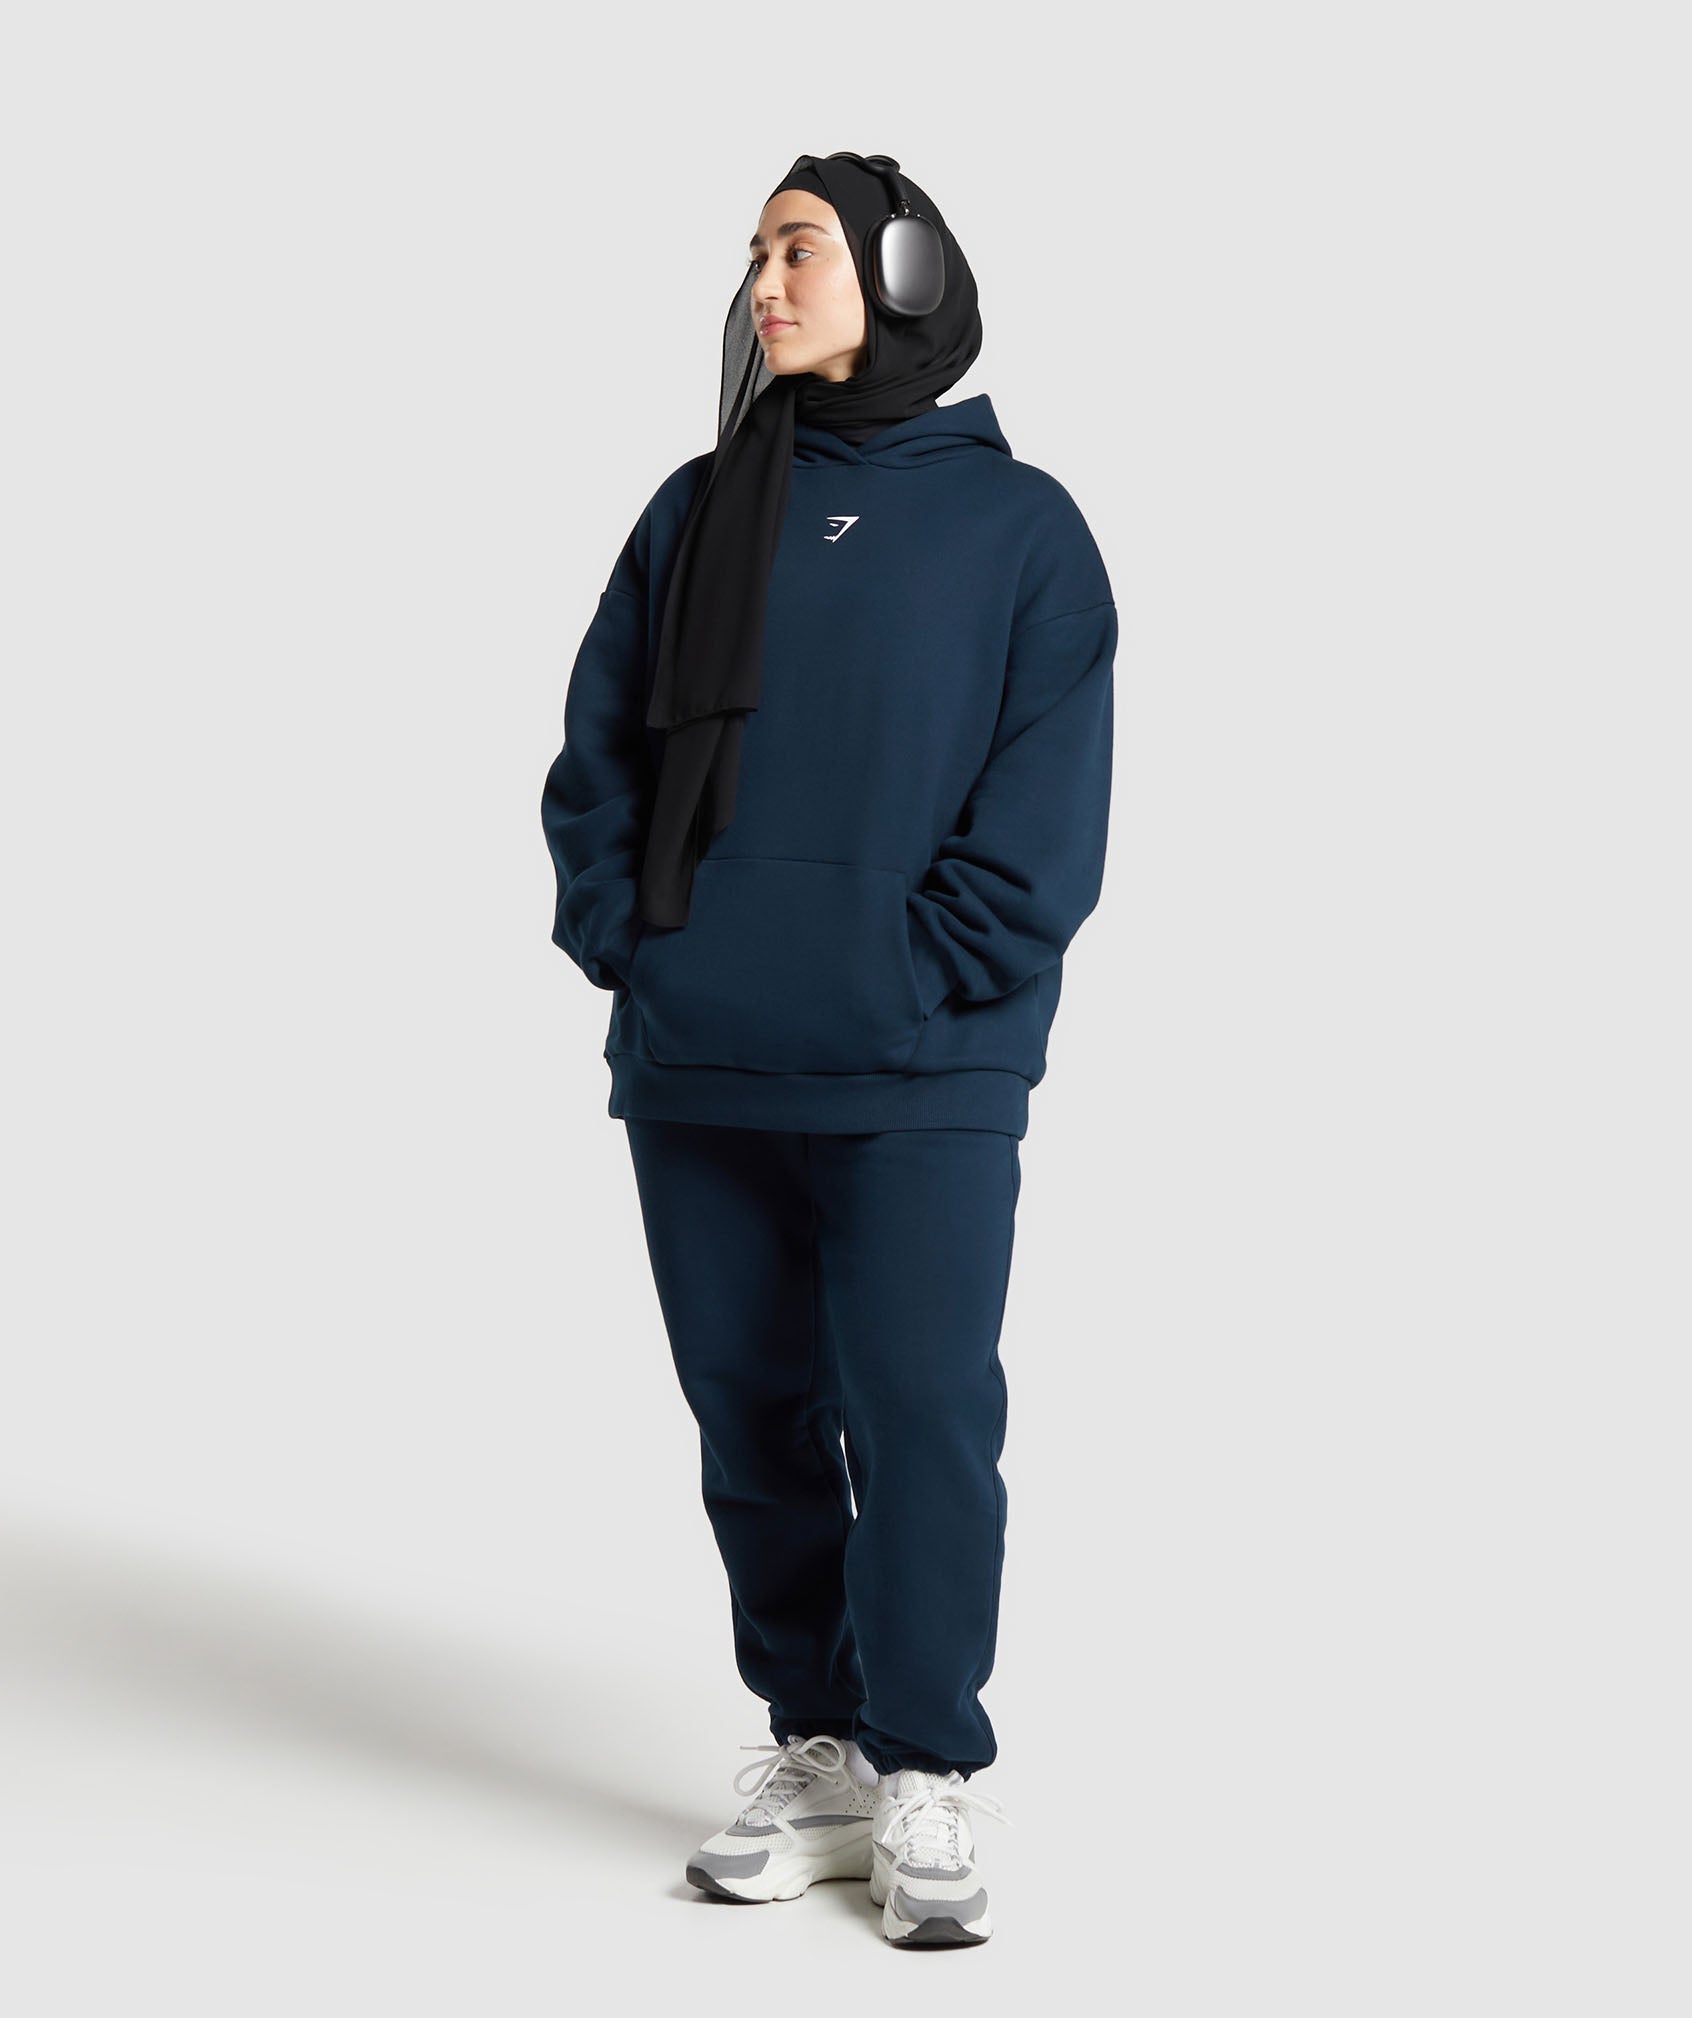 GS X Leana Deeb Oversized Joggers in Navy - view 4